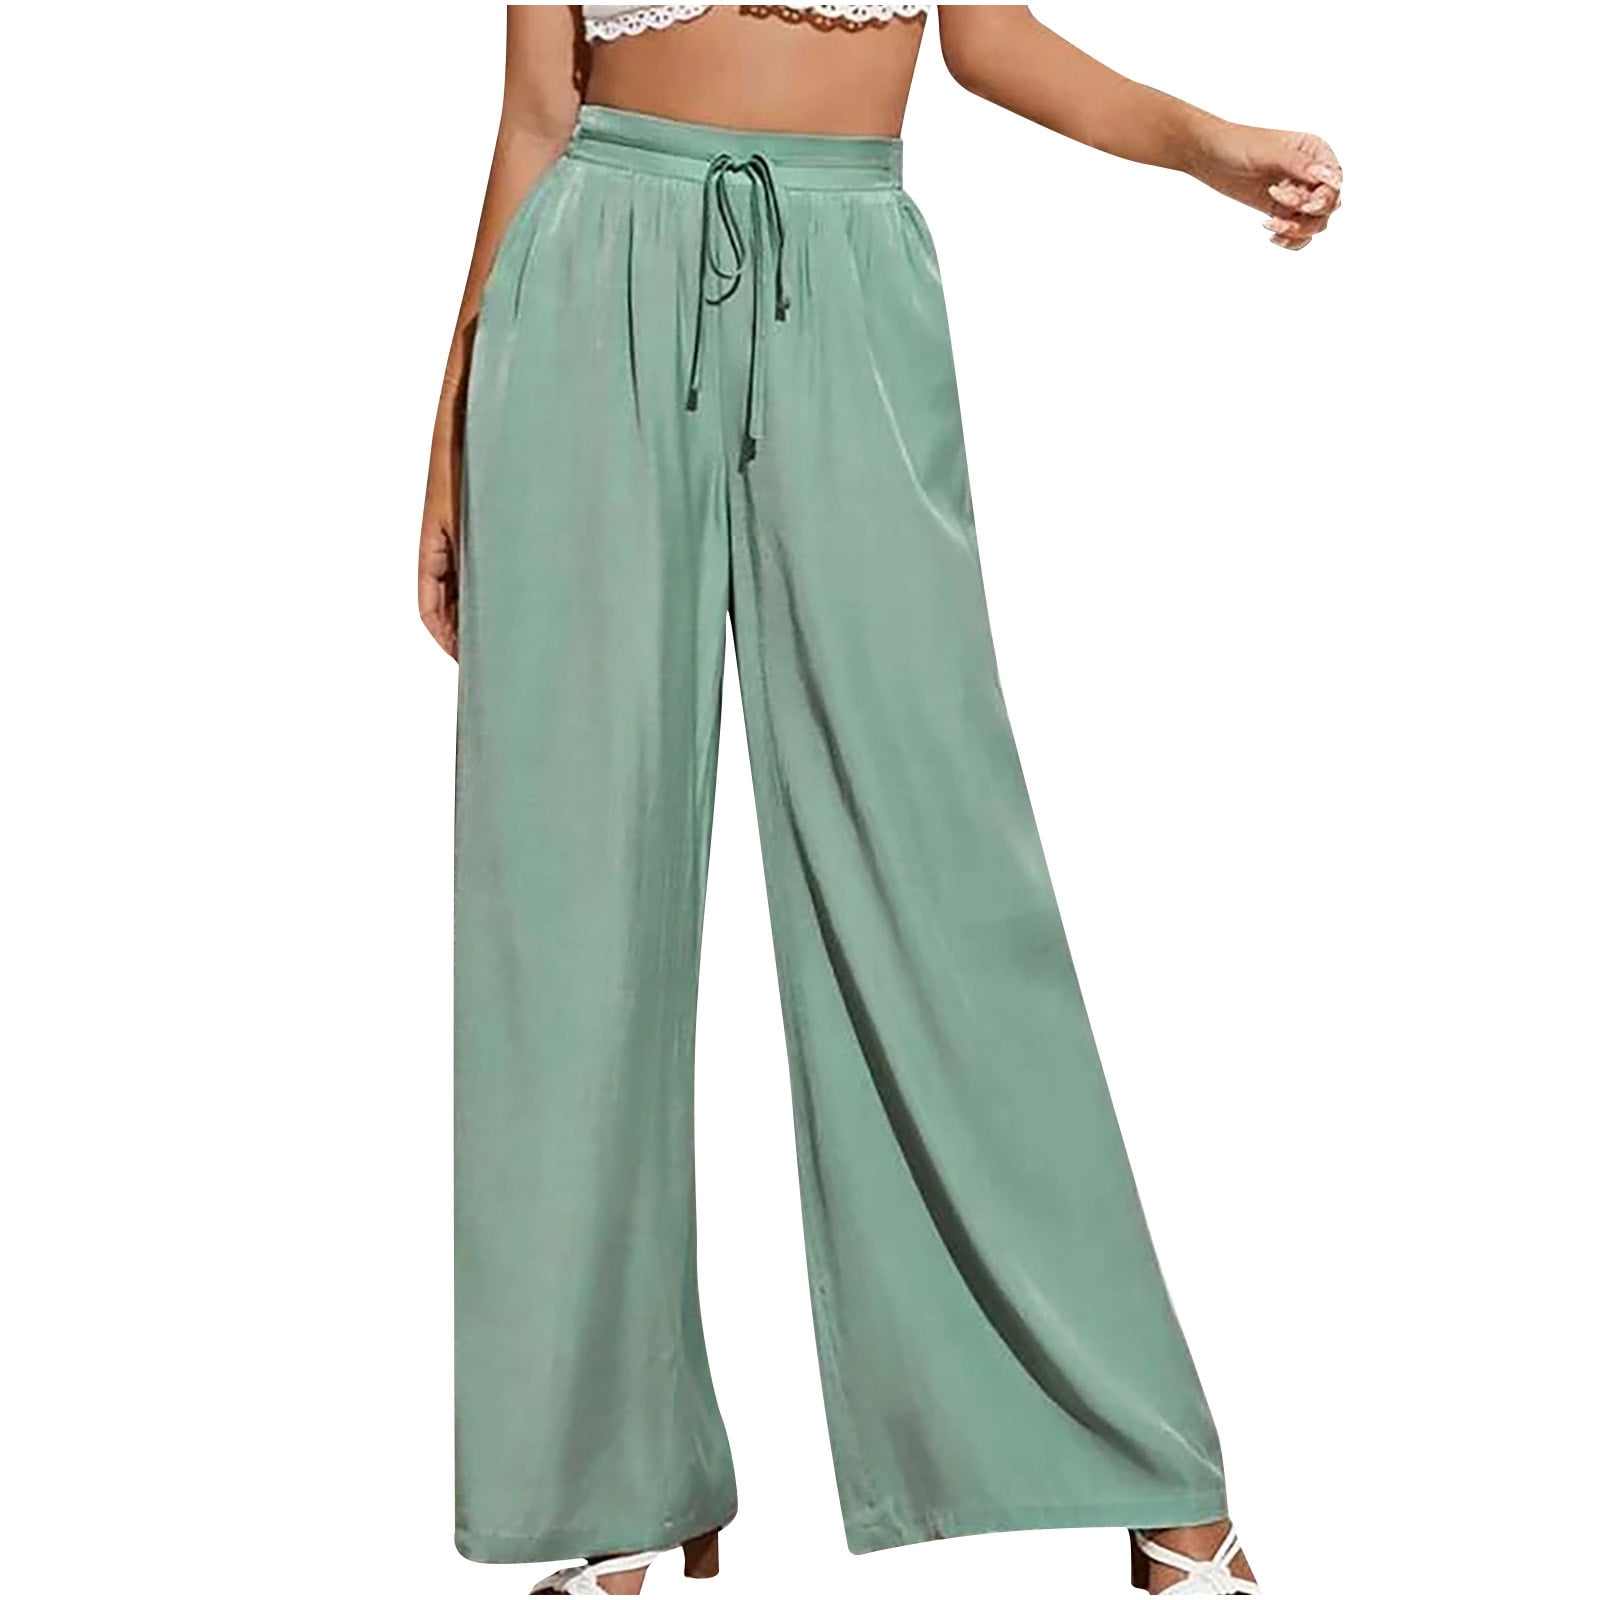 Loose Pants for Women Summer Casual Tailored Fit Women's Wide Leg